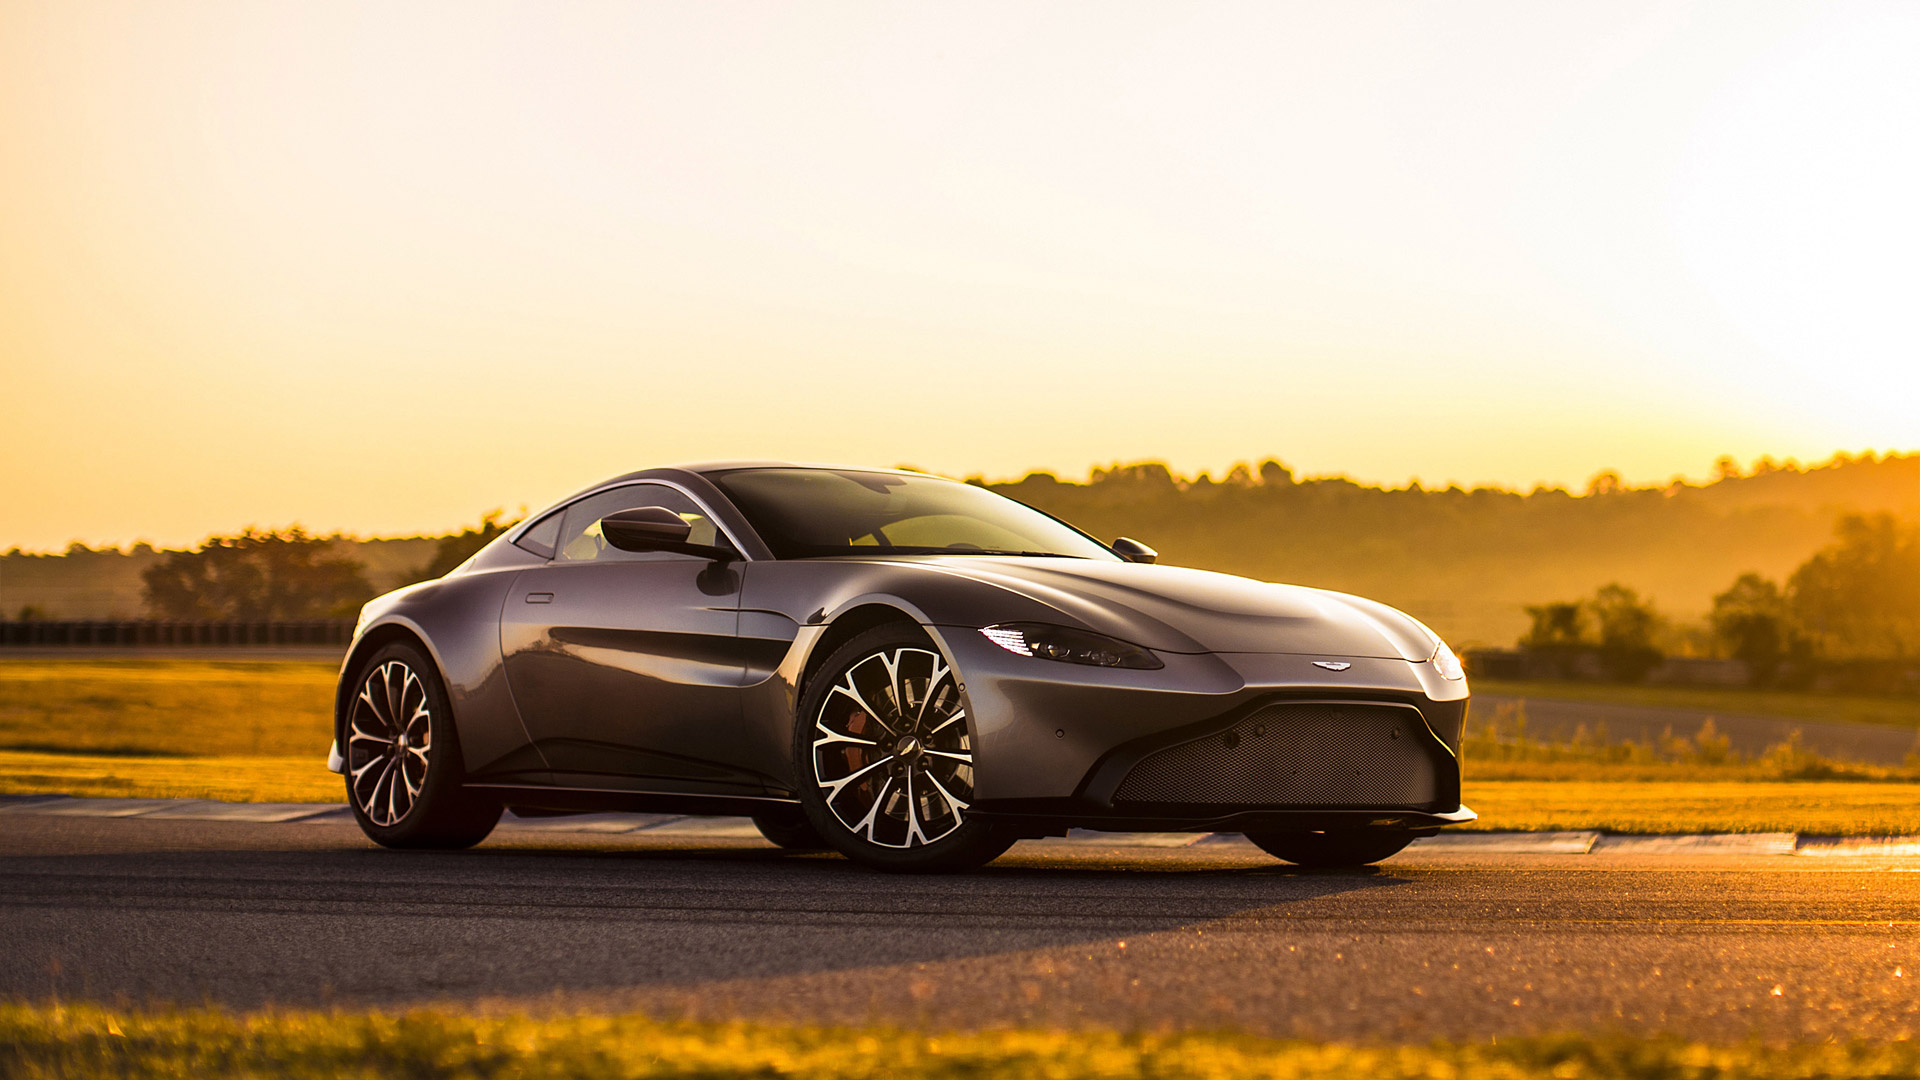 2019 Aston Martin Vantage Wallpapers HD Images   WSupercars